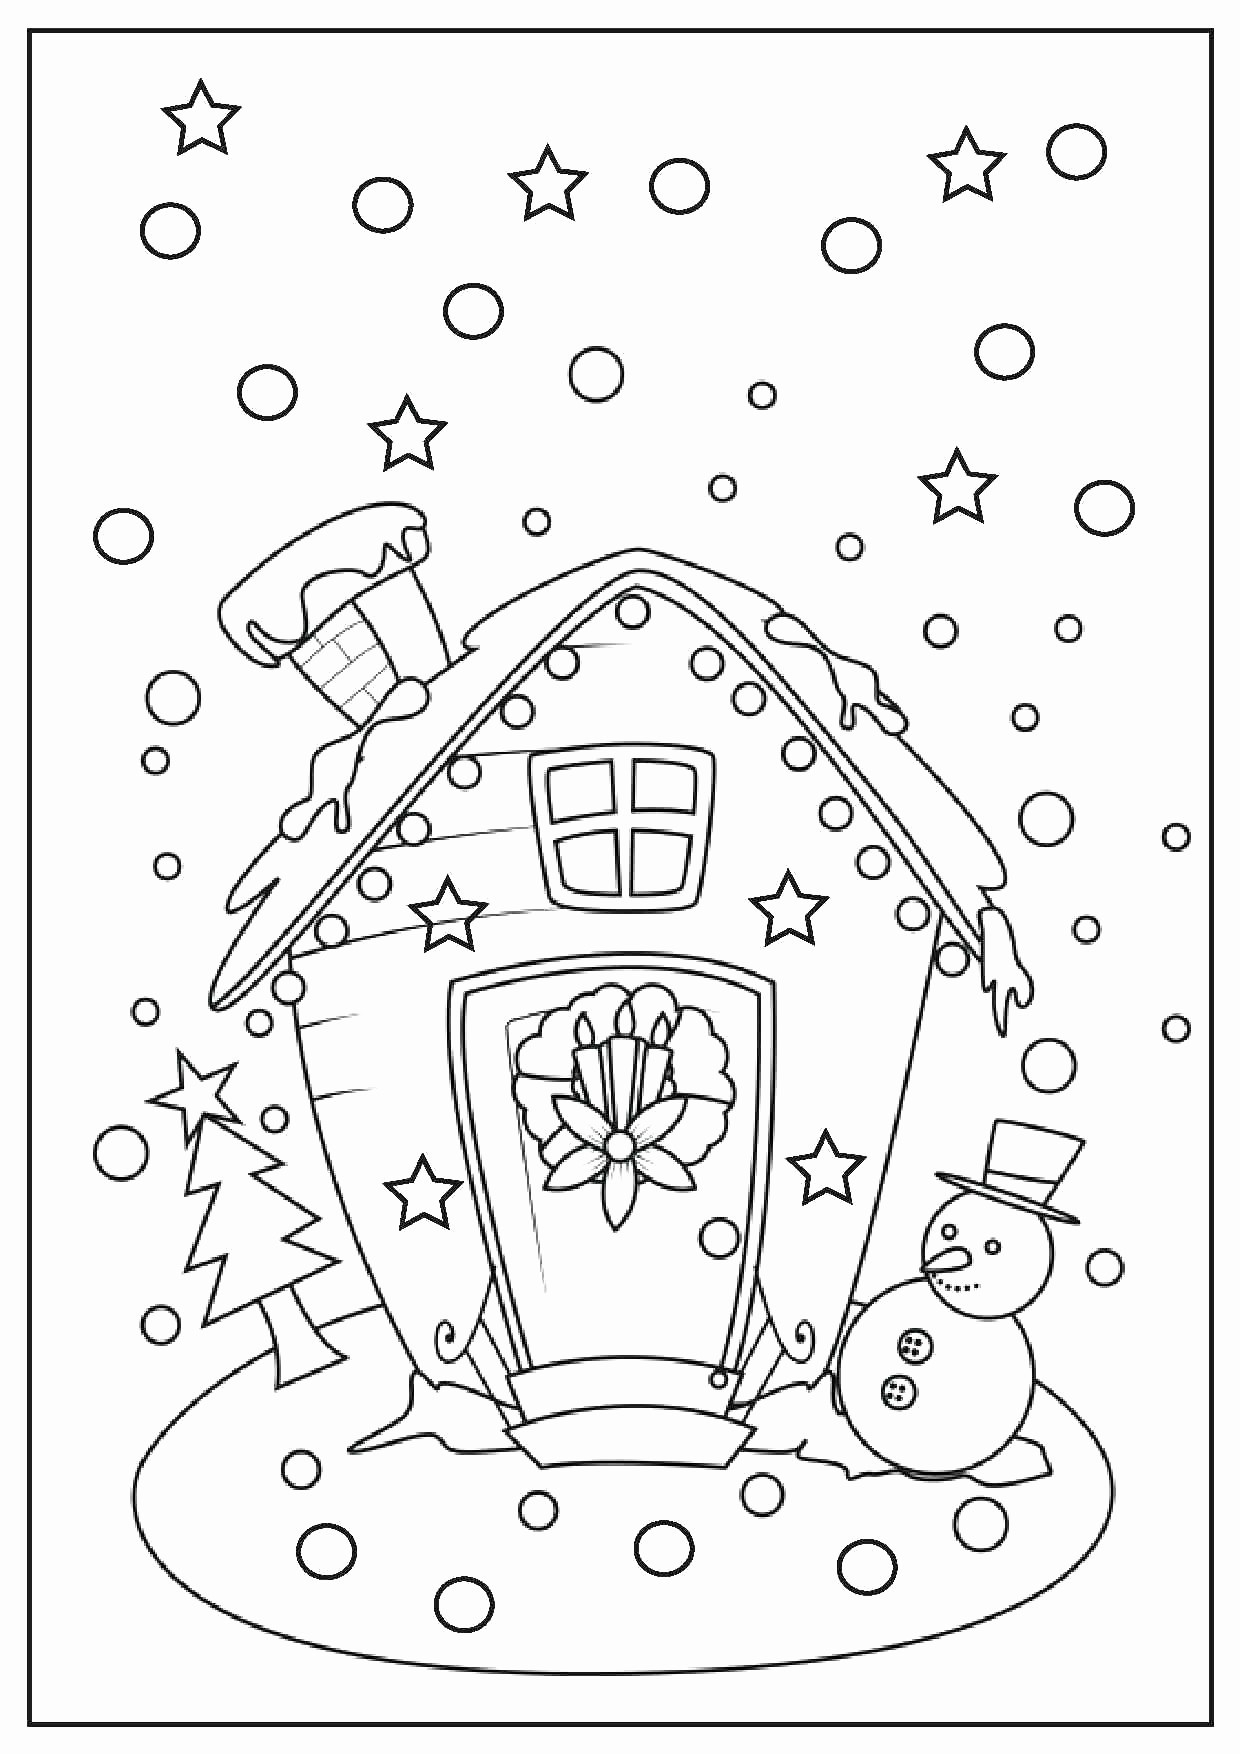 Giant Coloring Pages For Adults Unique Crayola Princess Coloring Pages Tintuc247